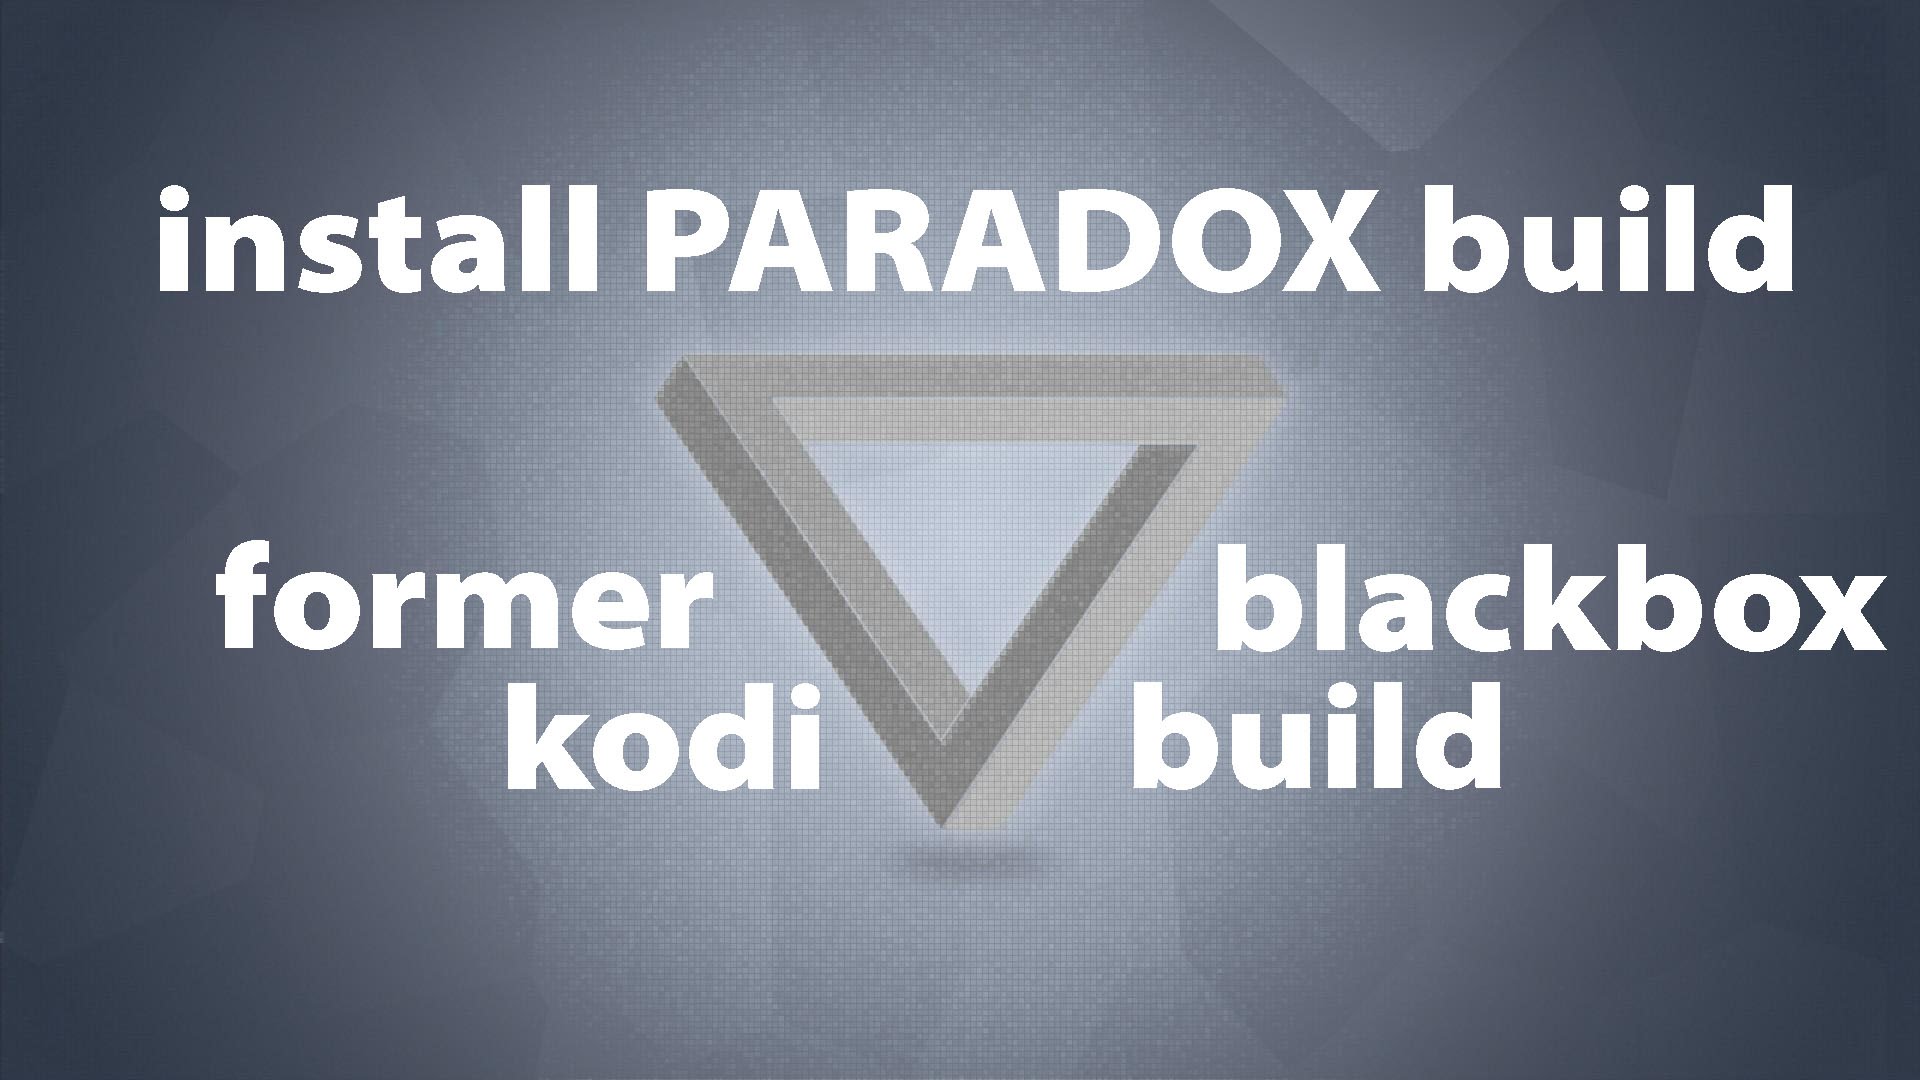 You are currently viewing New Paradox Kodi Build formerly known as BlackBox Build